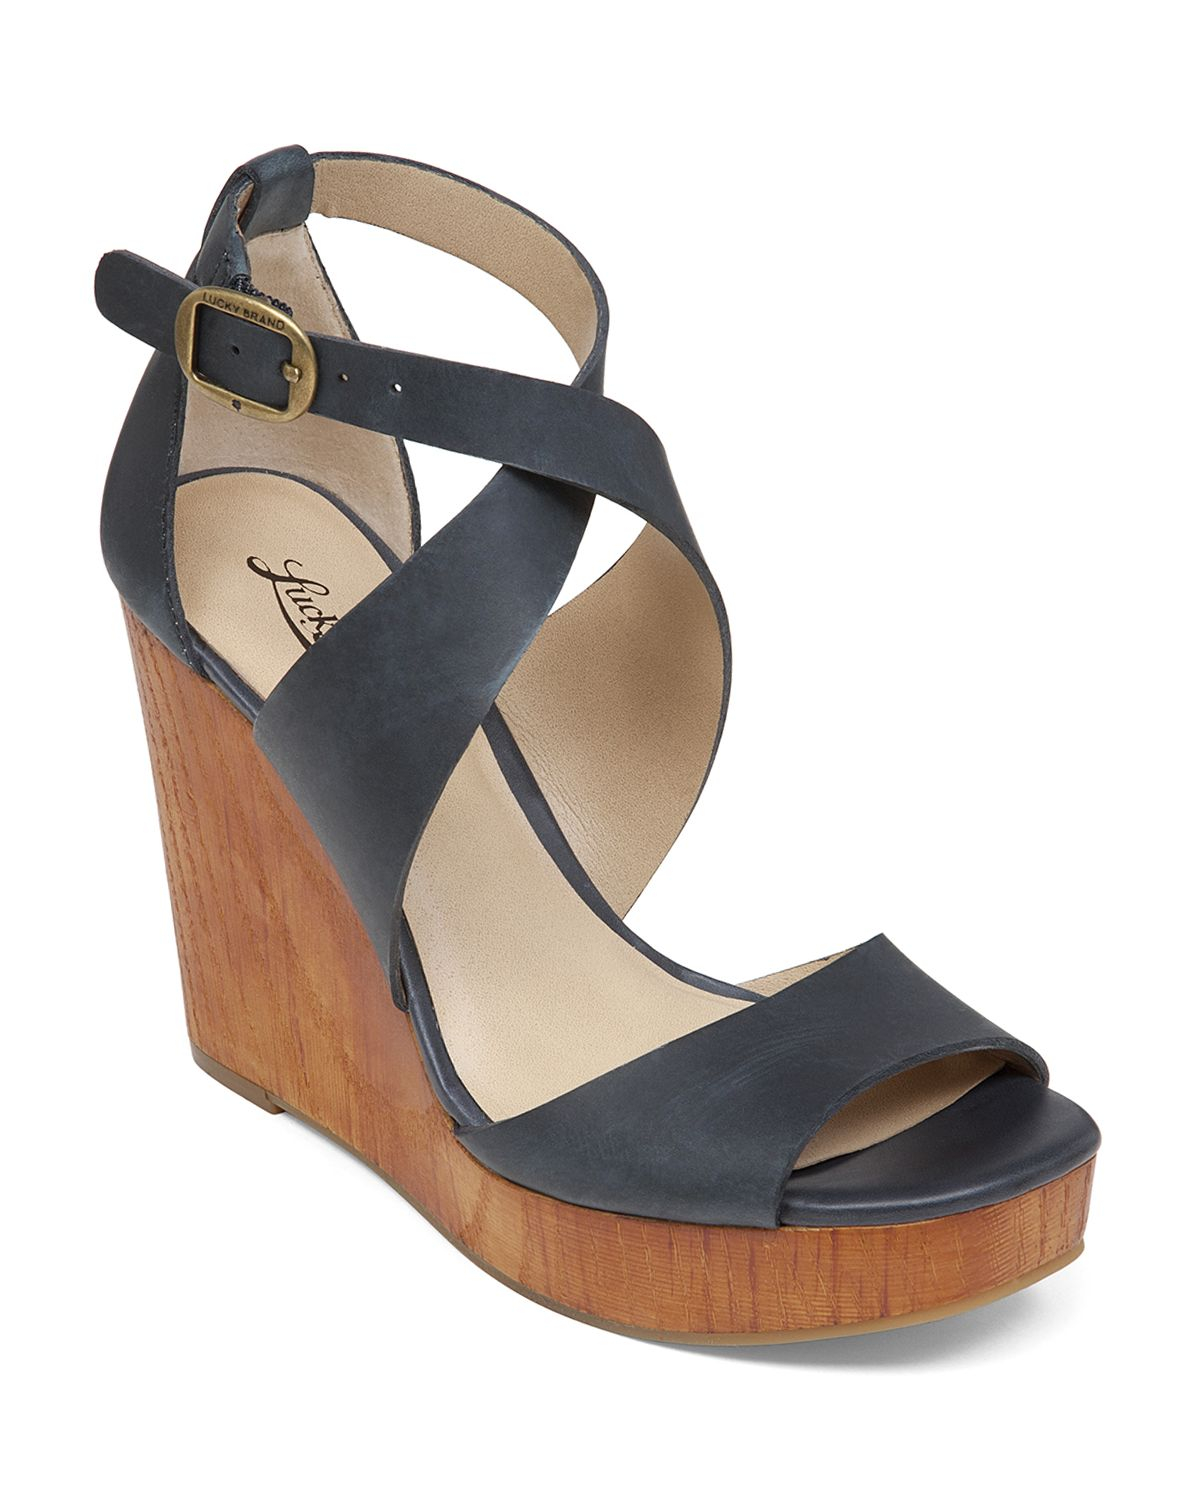 Lyst - Lucky Brand Wedge Sandals - Lyndell in Blue